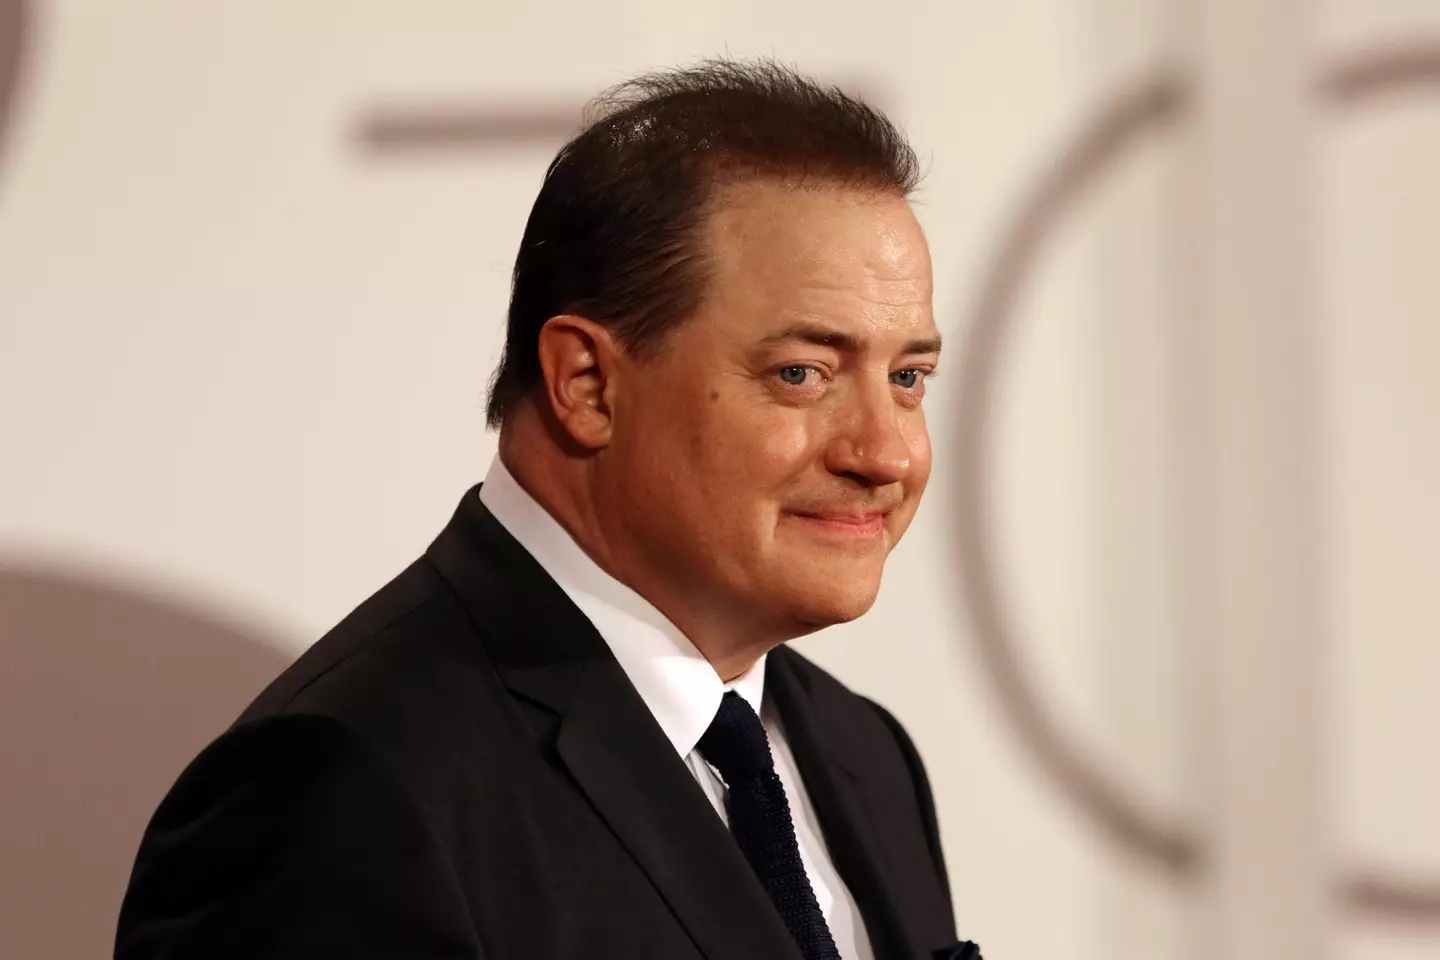 Brendan Fraser claimed he was sexually abused.